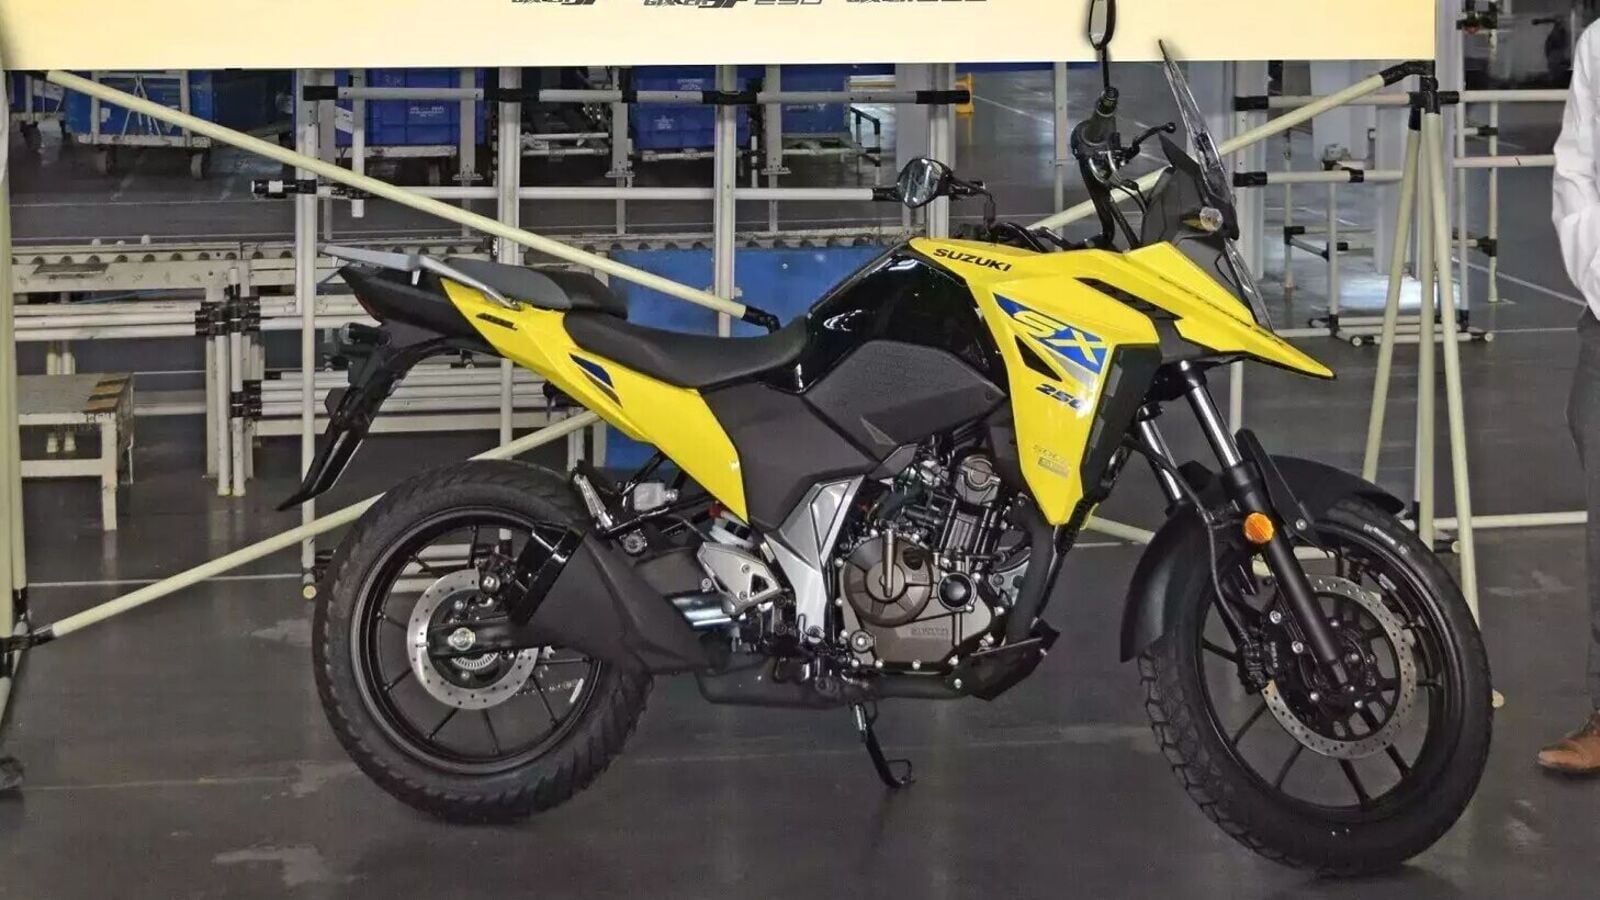 Suzuki Motorcycle India plant shut after cyber attack, production affected